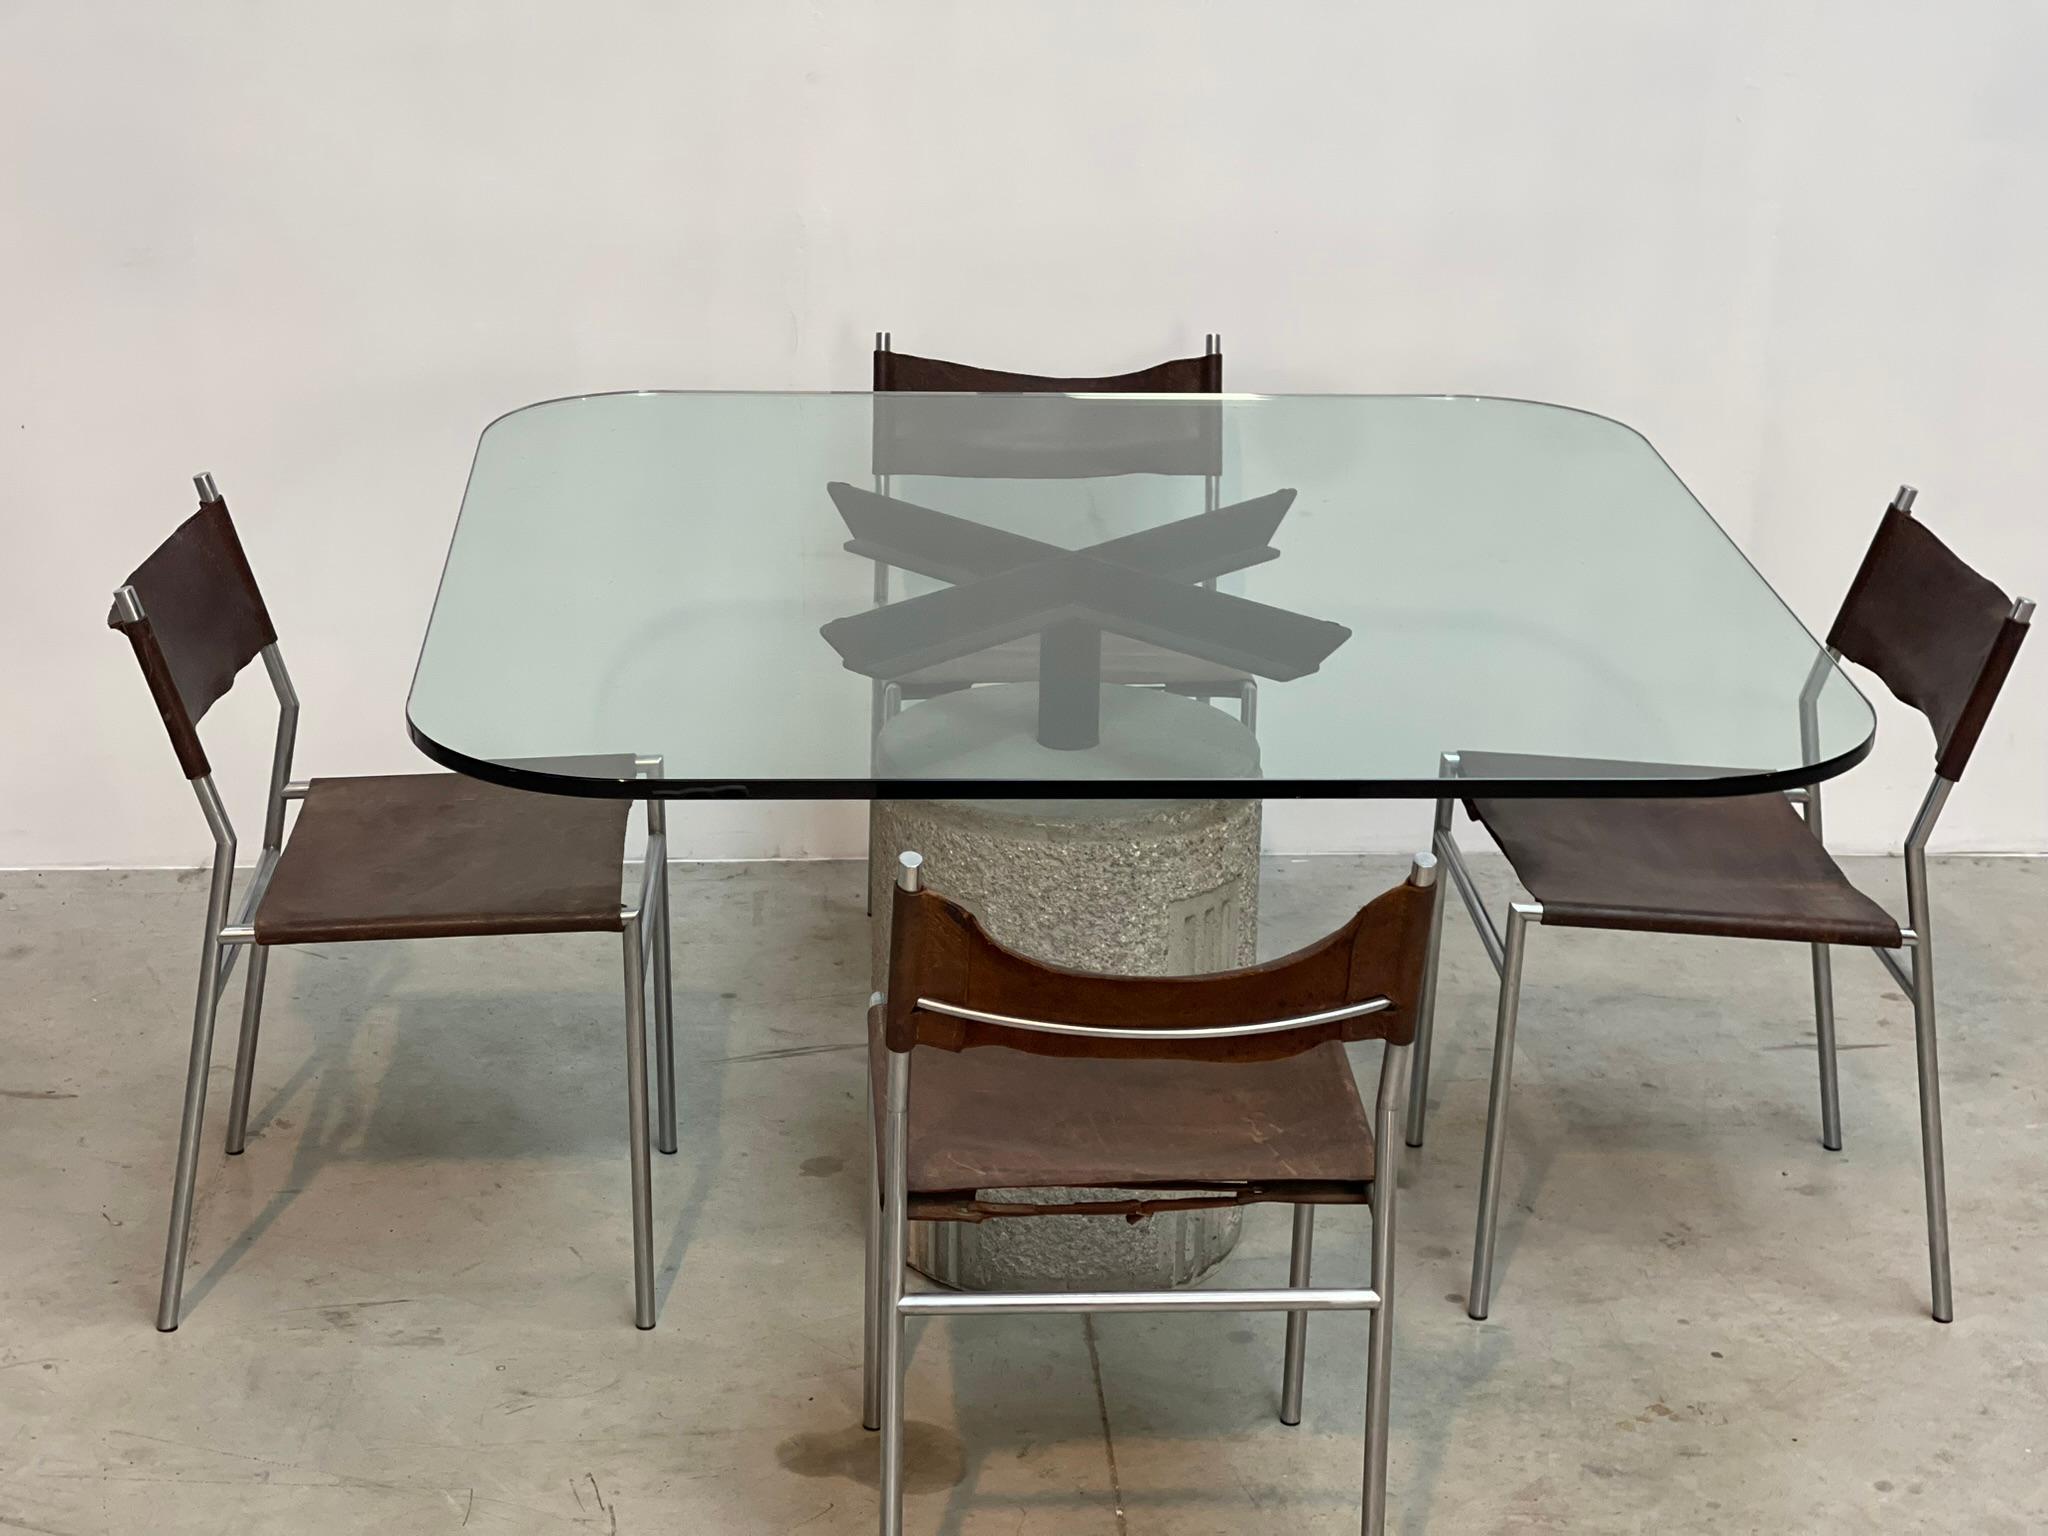 Concrete and metal center or dining table designed by Giovanni Offredi for Saporiti Italy model 'Paracarro'.

The table comes with its original squared with rounded edges table top.

The table base is in a good condition.

1970s -